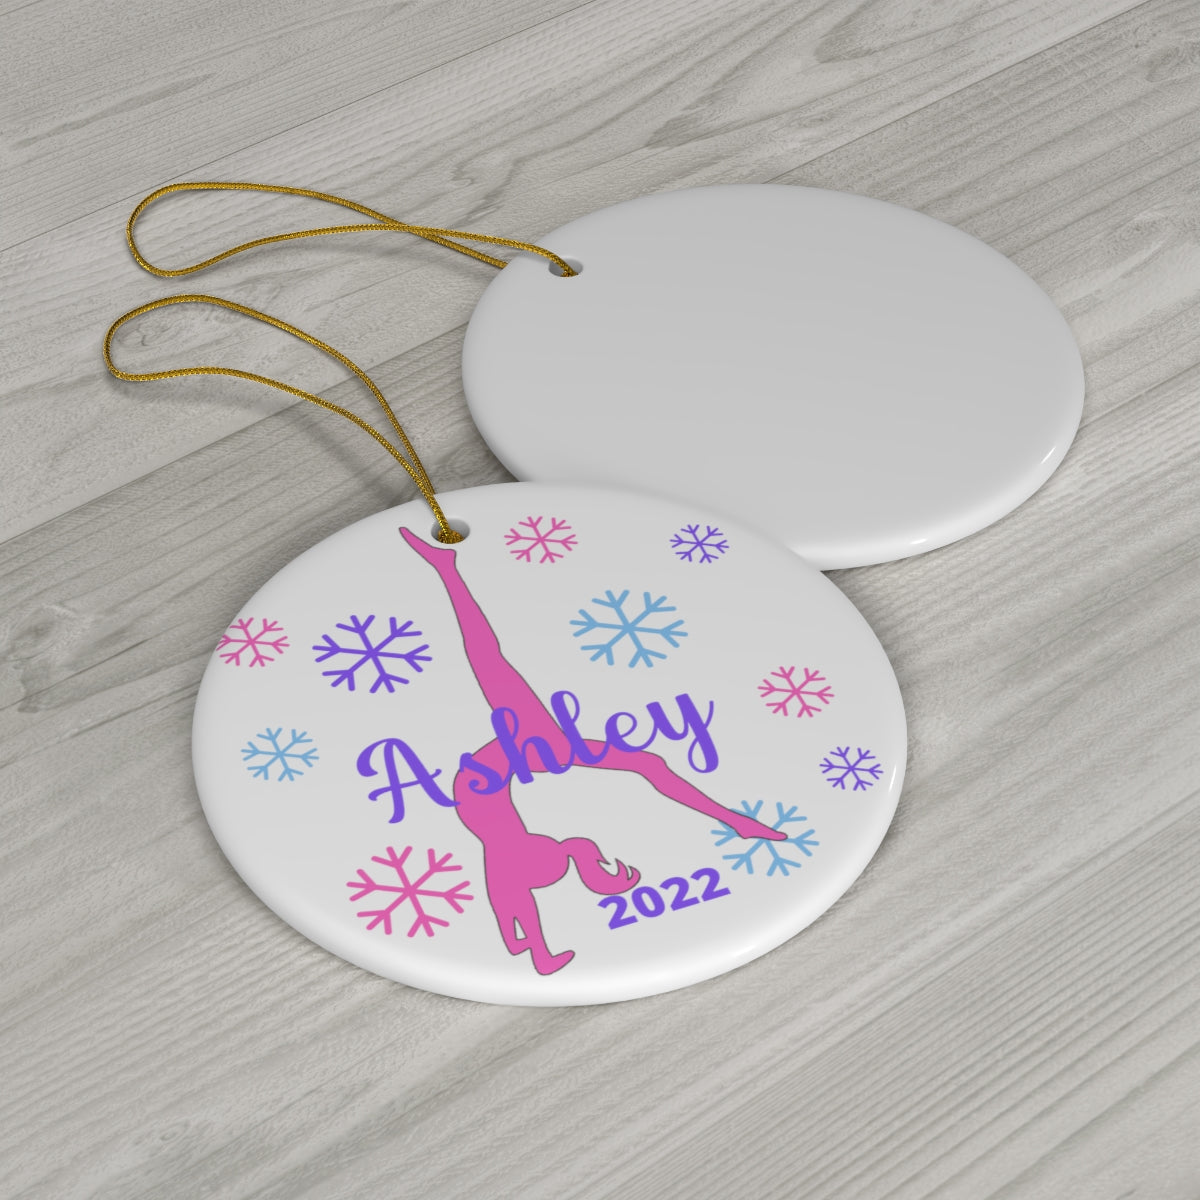 Personalized Gymnastics Christmas Ornament with a Name and Year